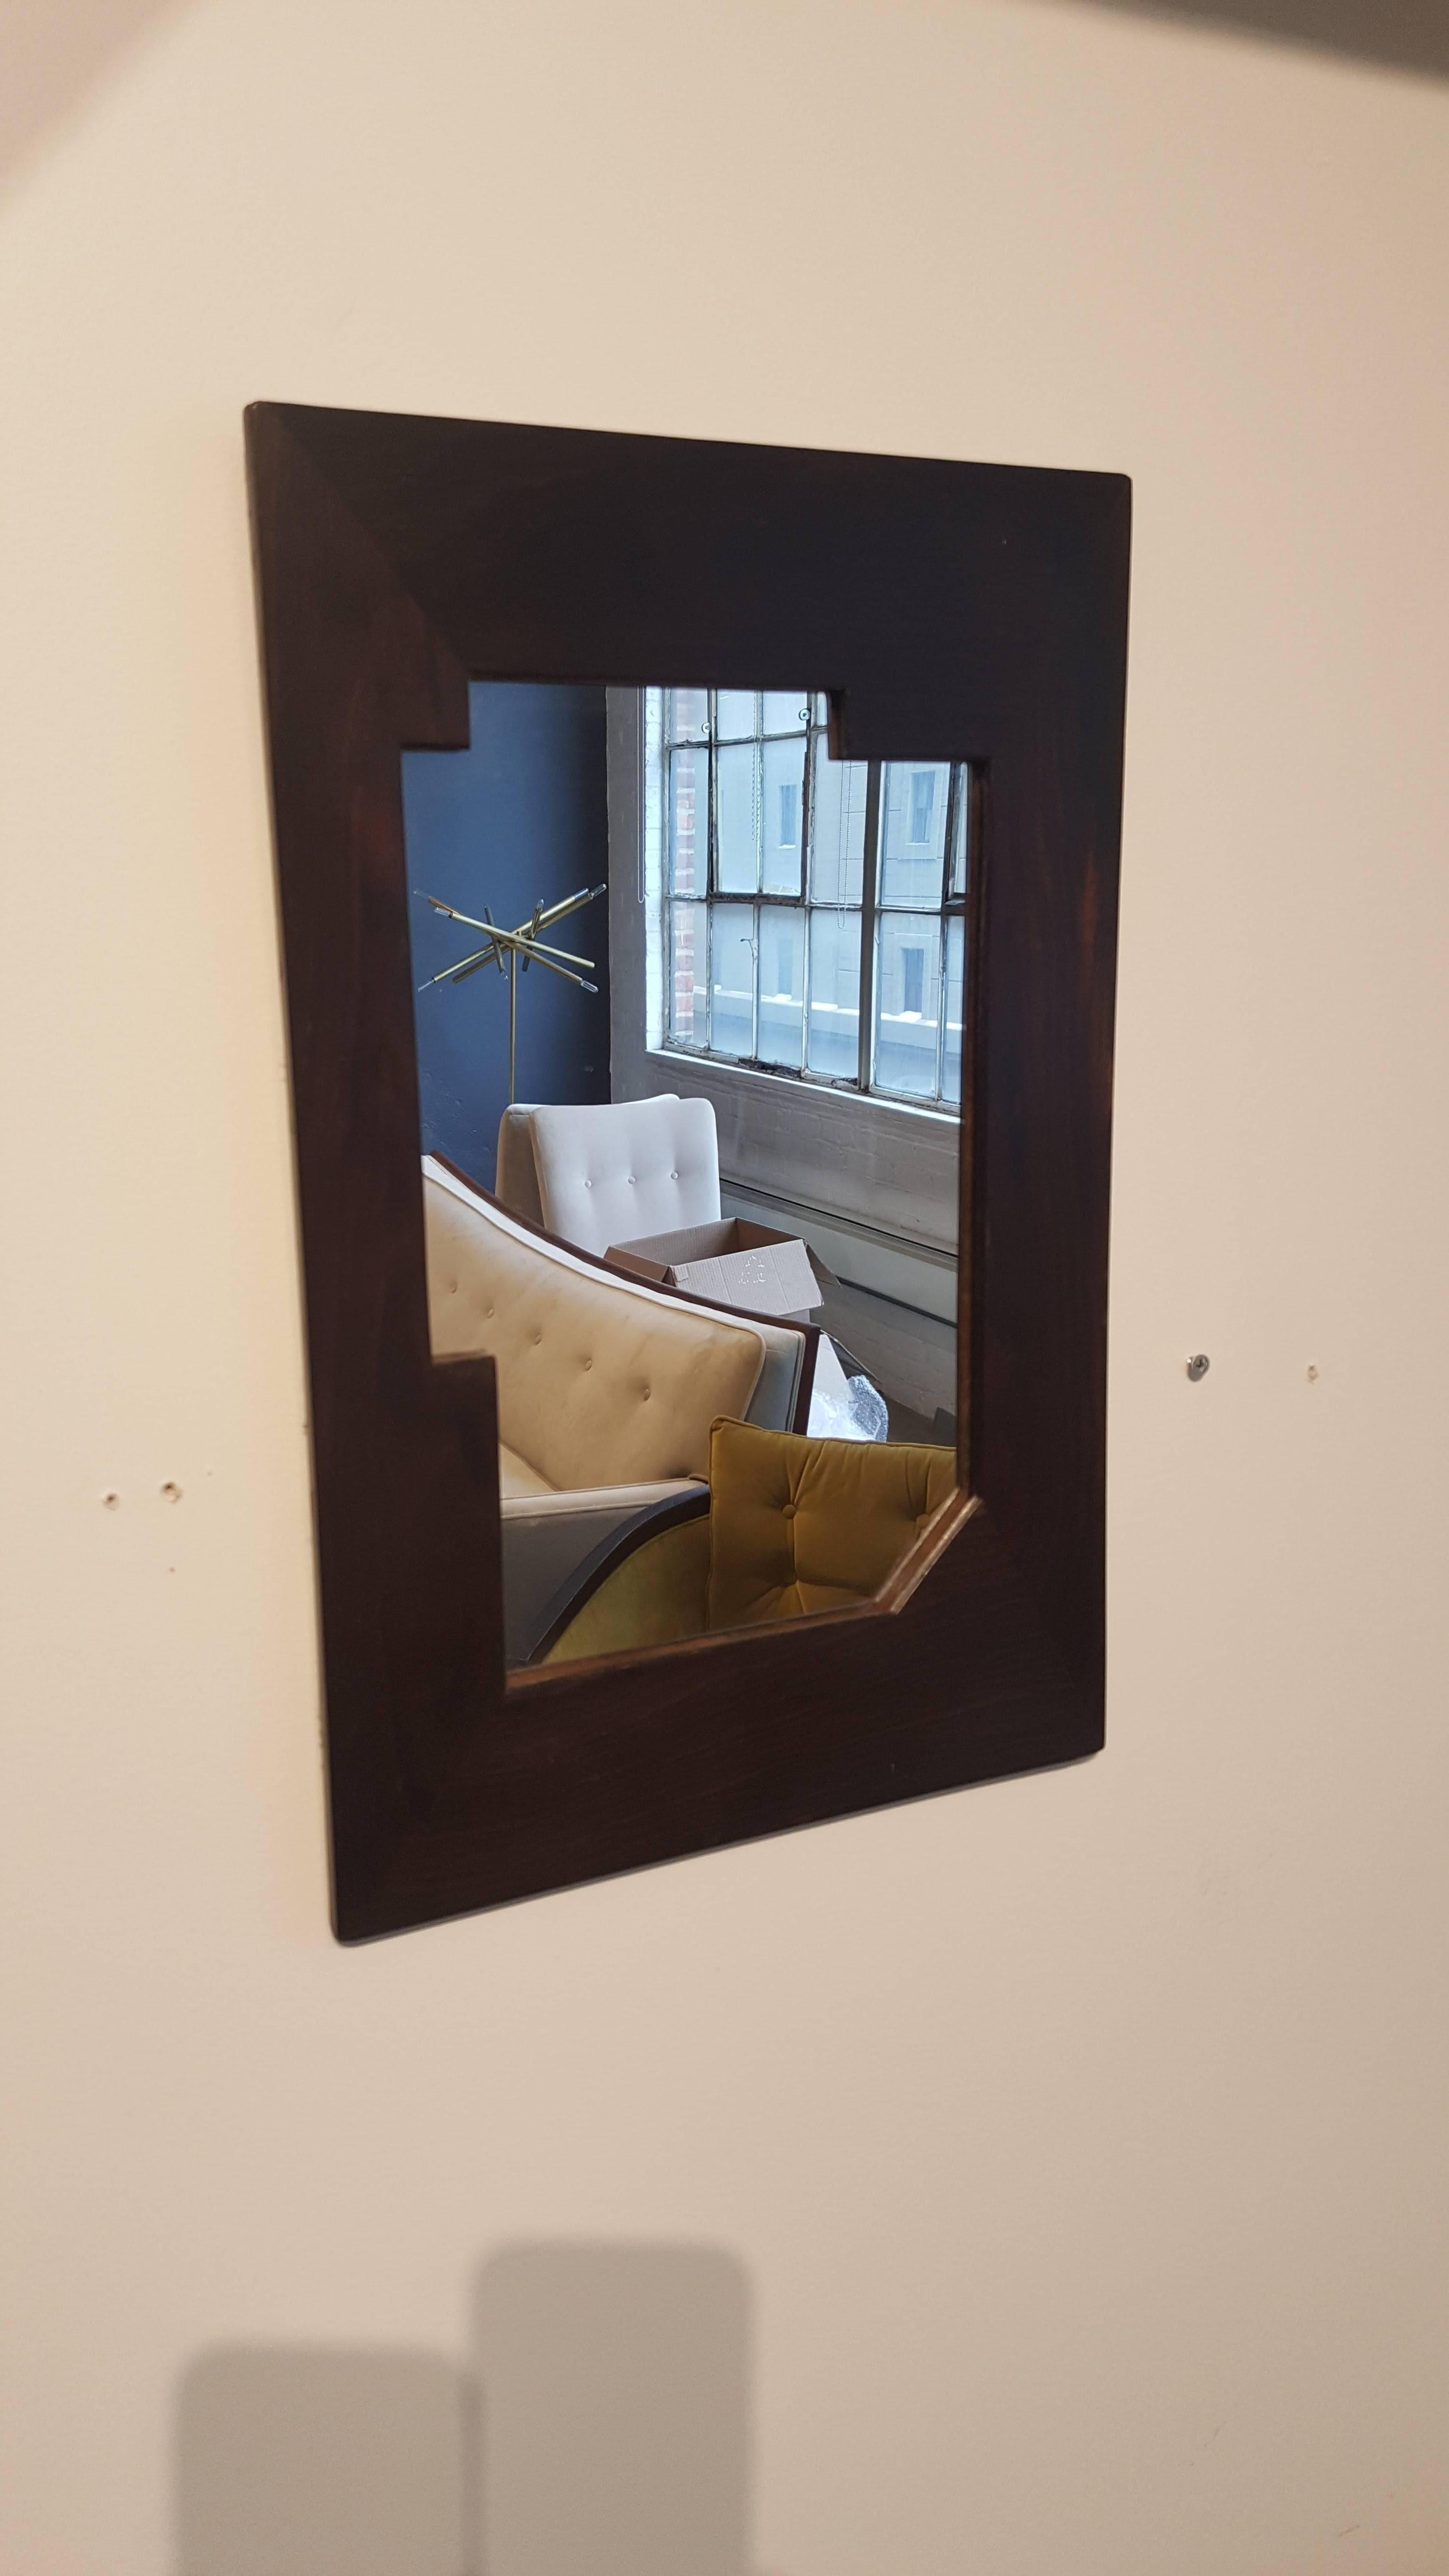 Petite wall mirror in dark rosewood, circa 1920s. The piece has stark, geometric Bauhaus lines and is in the International style. Origin and designer unknown, but likely European. In excellent vintage condition with no issues. Would be lovely in a